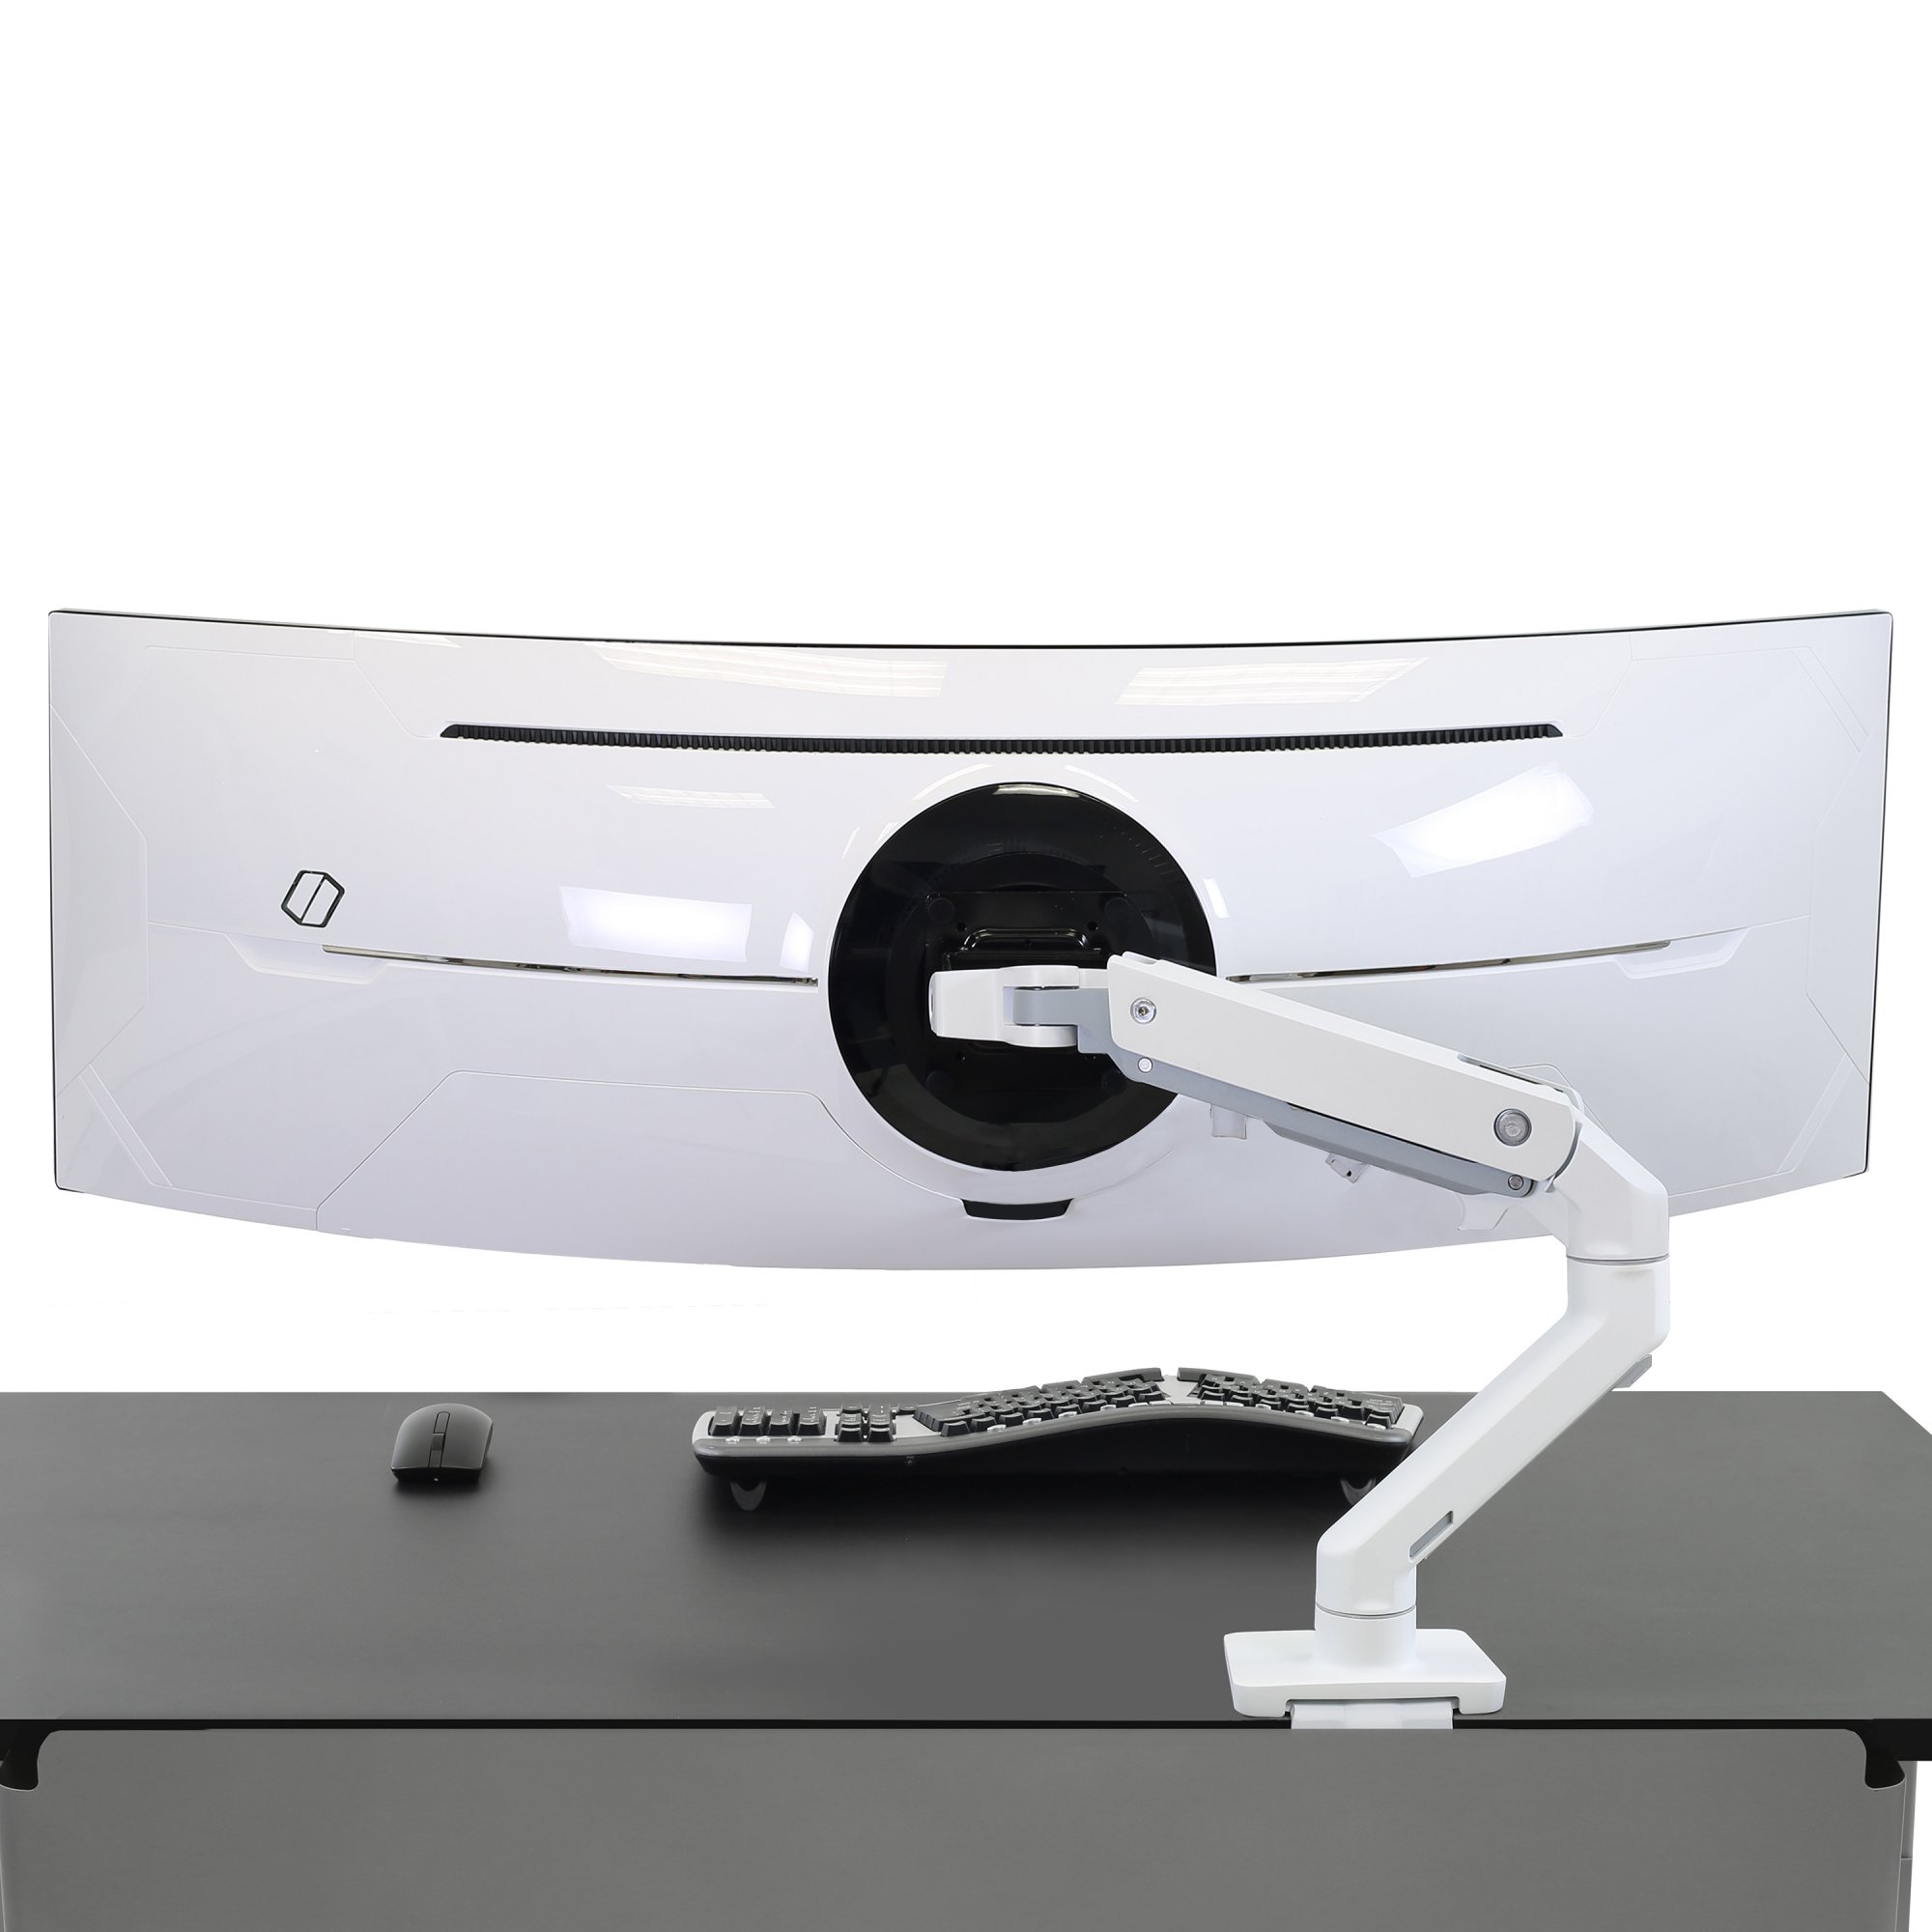 Simple adjustability - A wide range of motion enables precise screen positioning